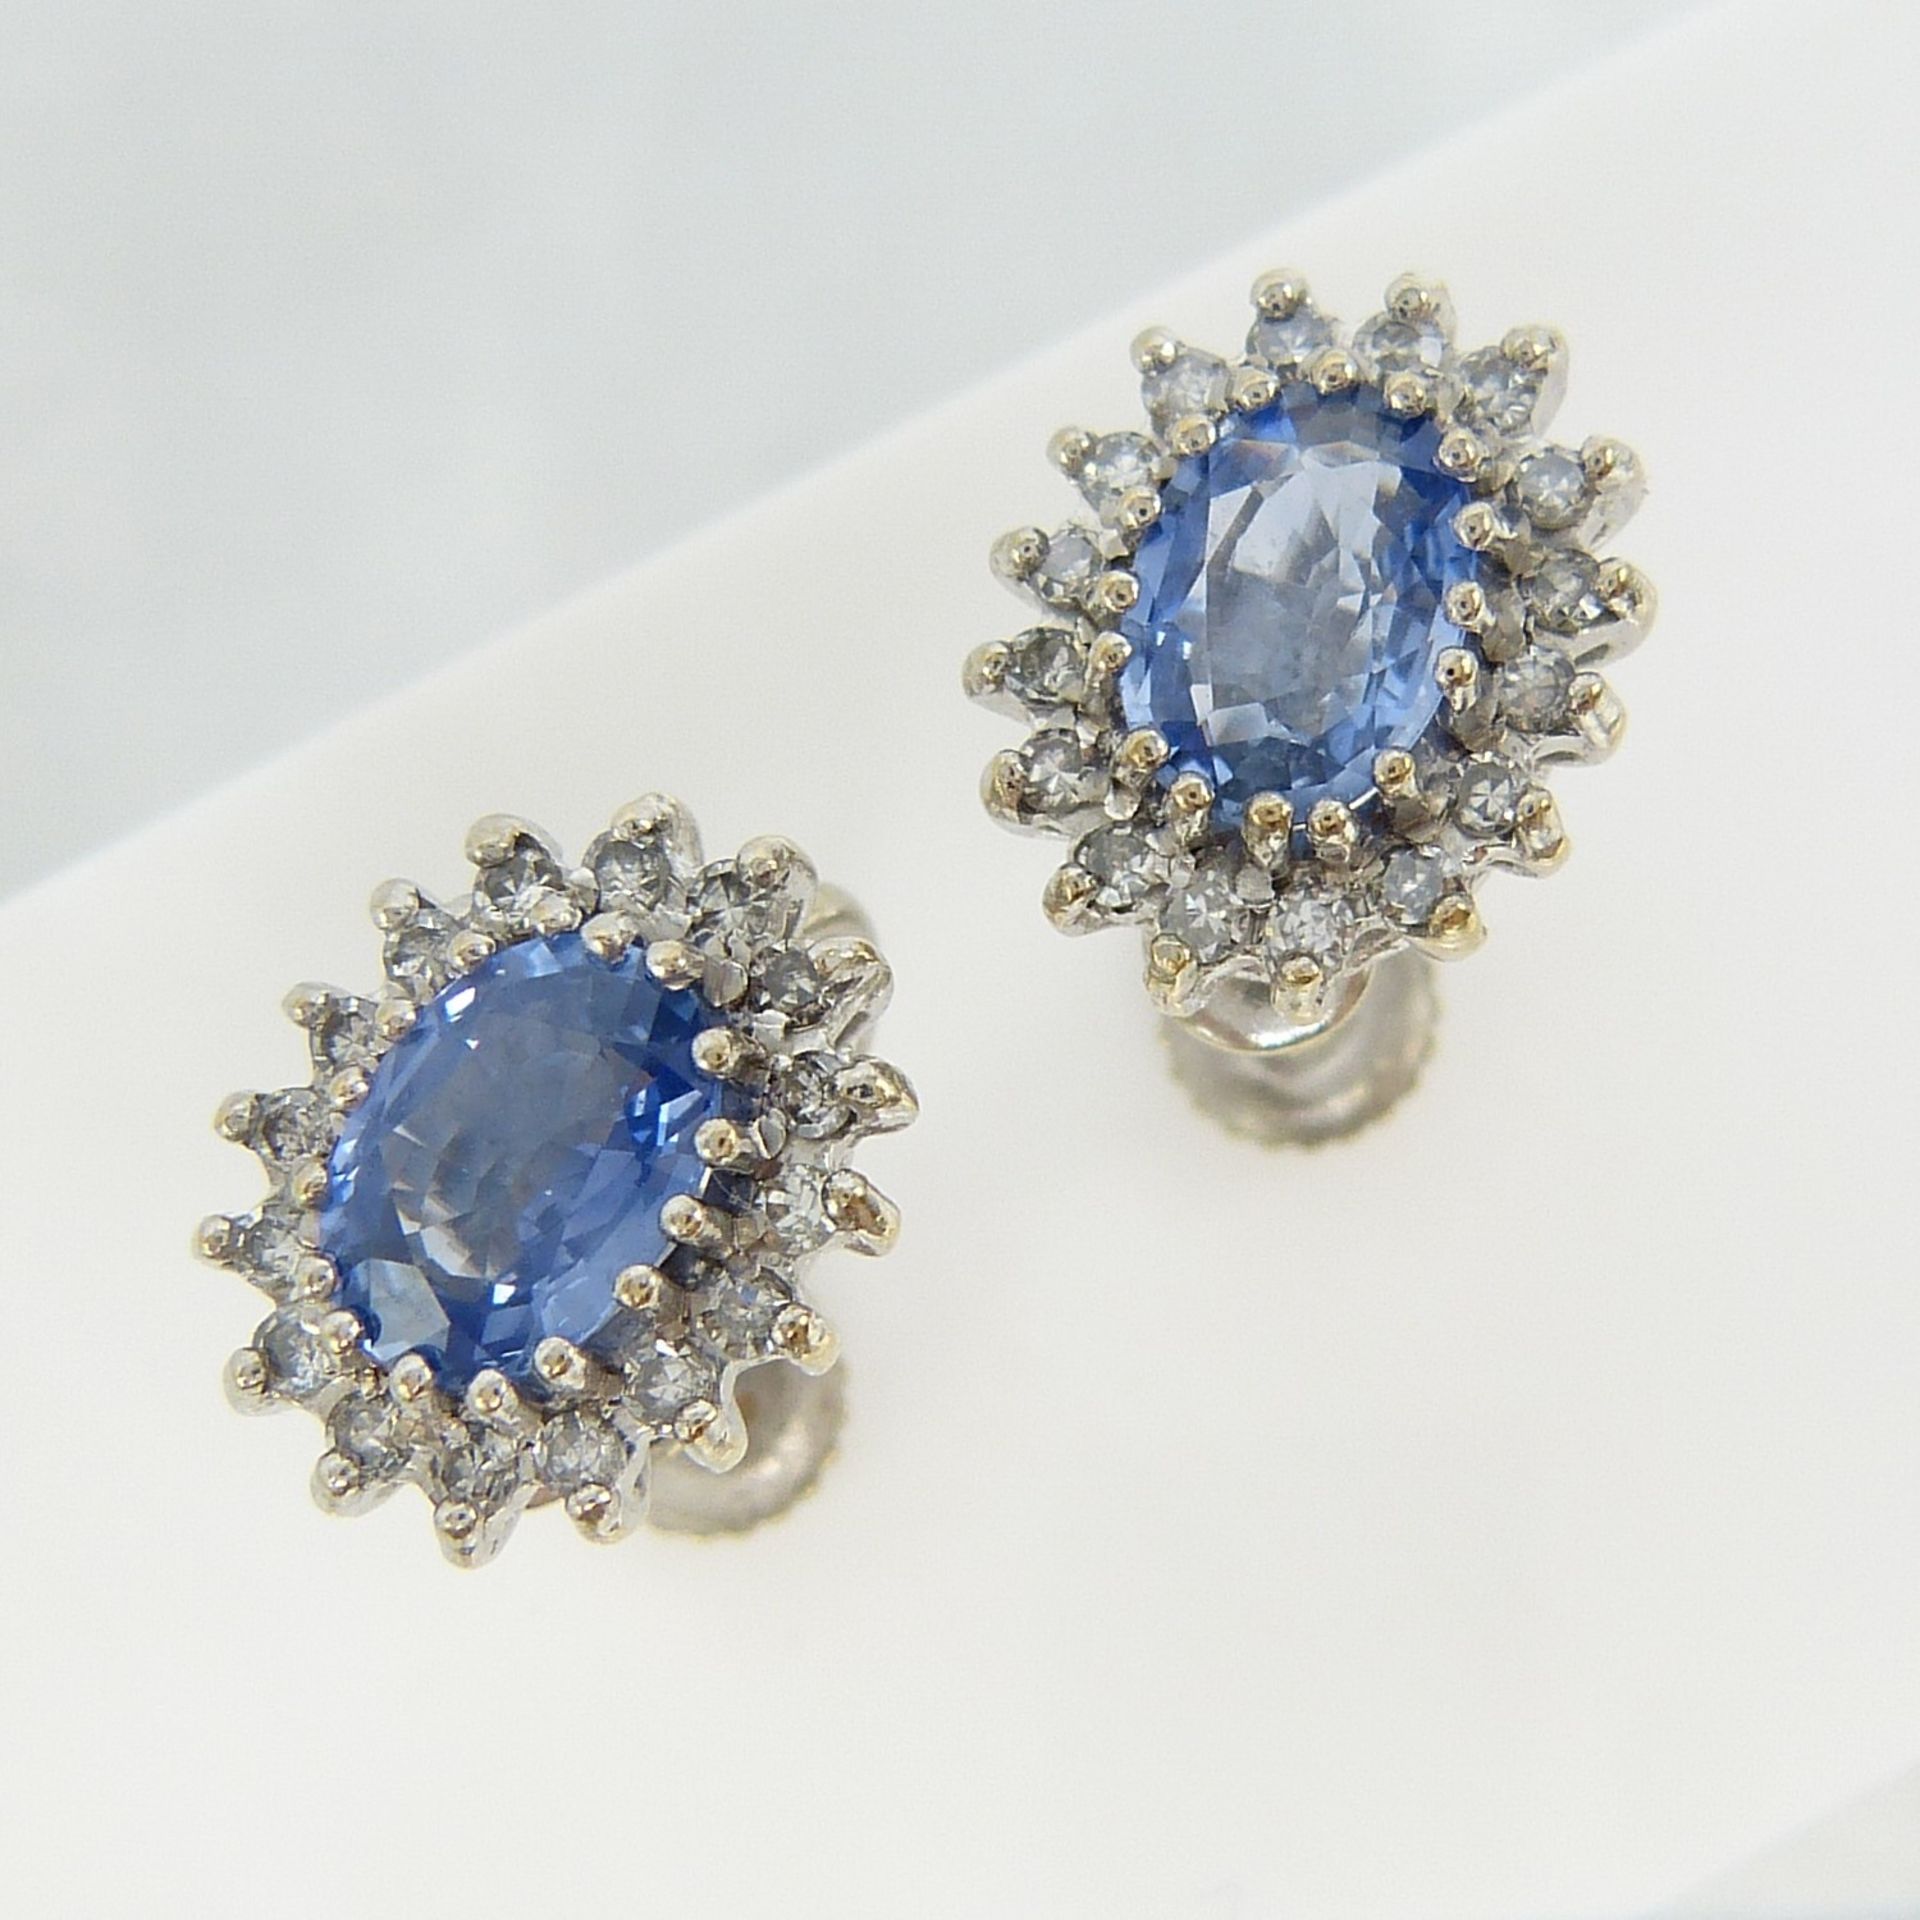 Vintage Pair of Cornflower Blue Sapphire and Diamond Ear Studs With Screw Back Clip On Fittings - Image 6 of 7